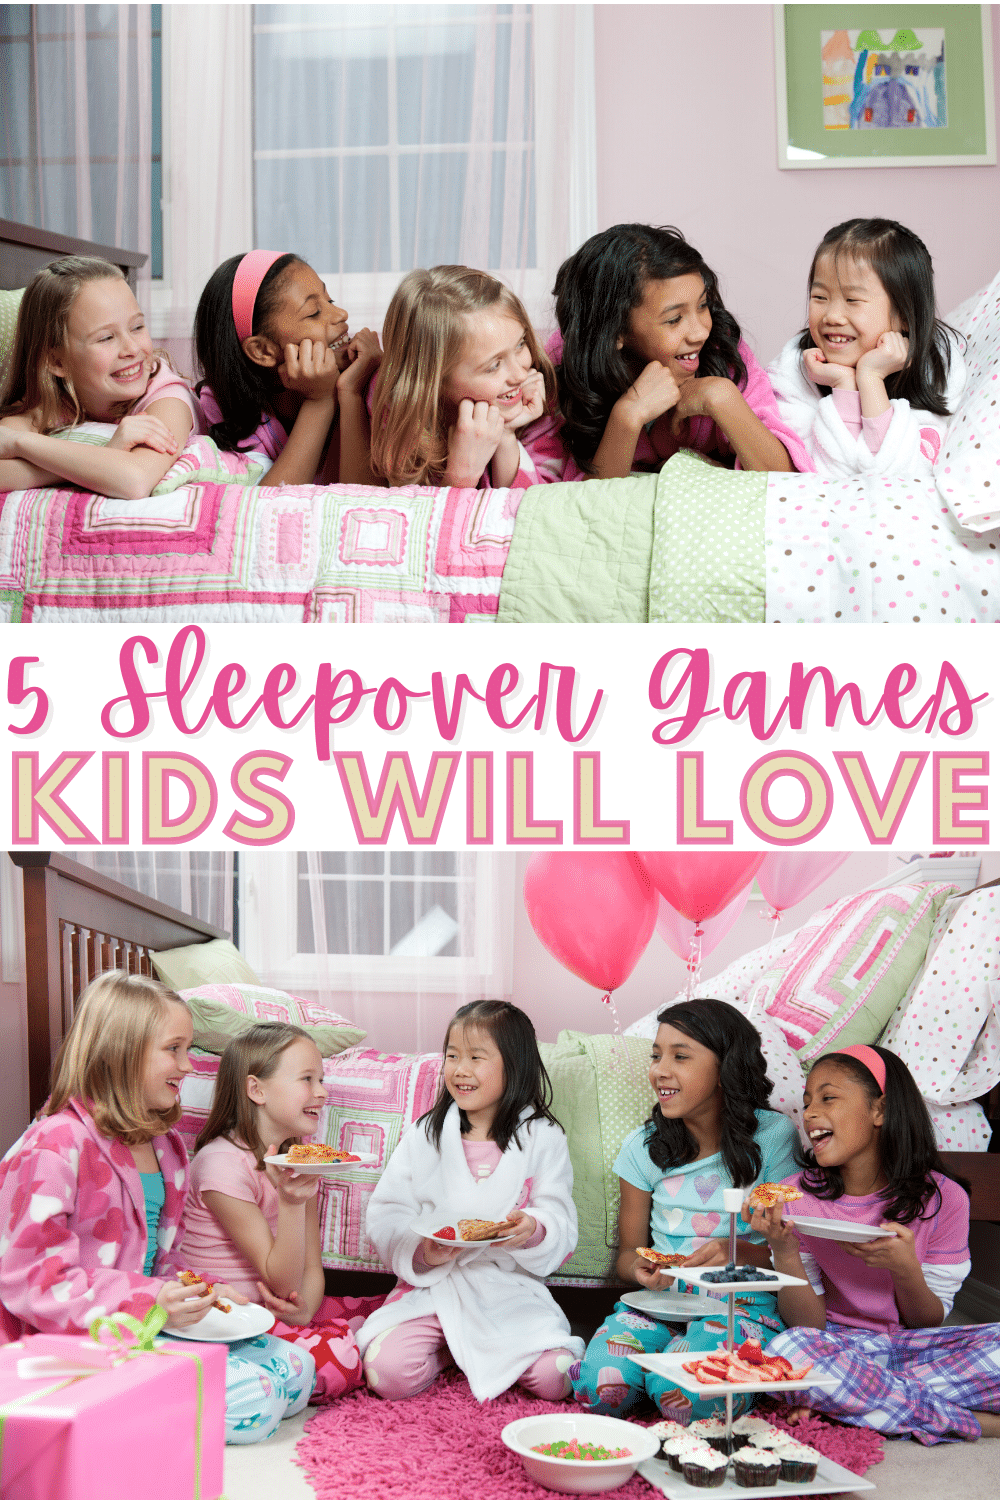 Kids love sleepovers but it can be tough to plan activities for all those hours! Try these sleepover games for tons of sleepover fun.#sleepover #sleepovers #kidsactivities #tweens via @wondermomwannab